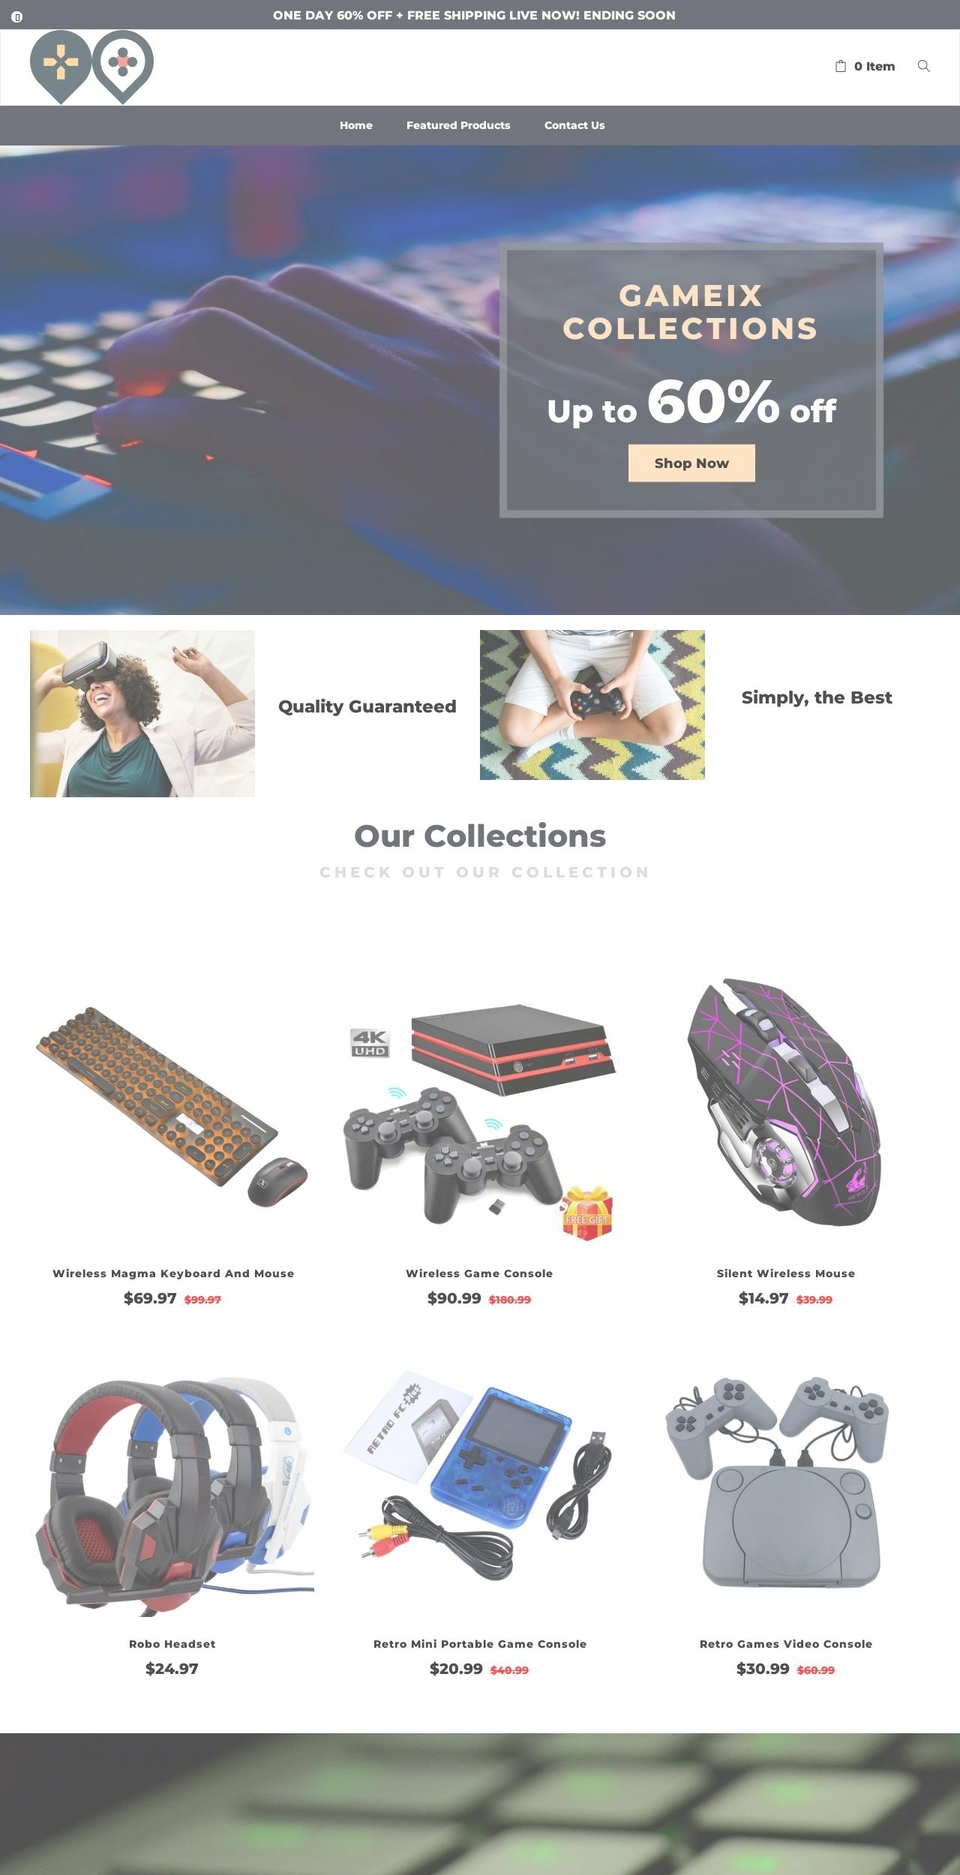 Gaming Shopify theme site example letsbegame.com